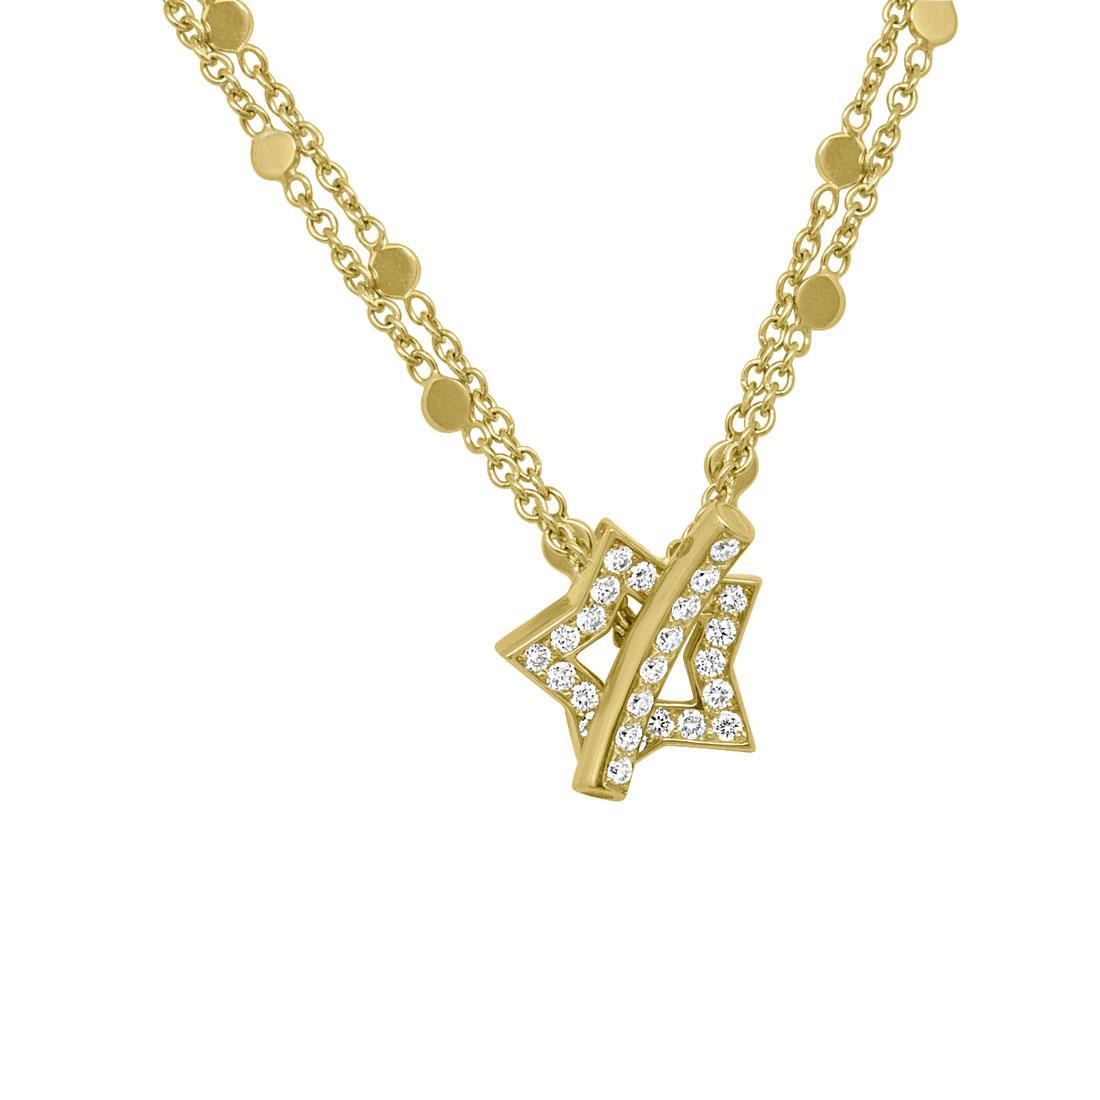 Make Love necklace in yellow gold with diamonds - PASQUALE BRUNI